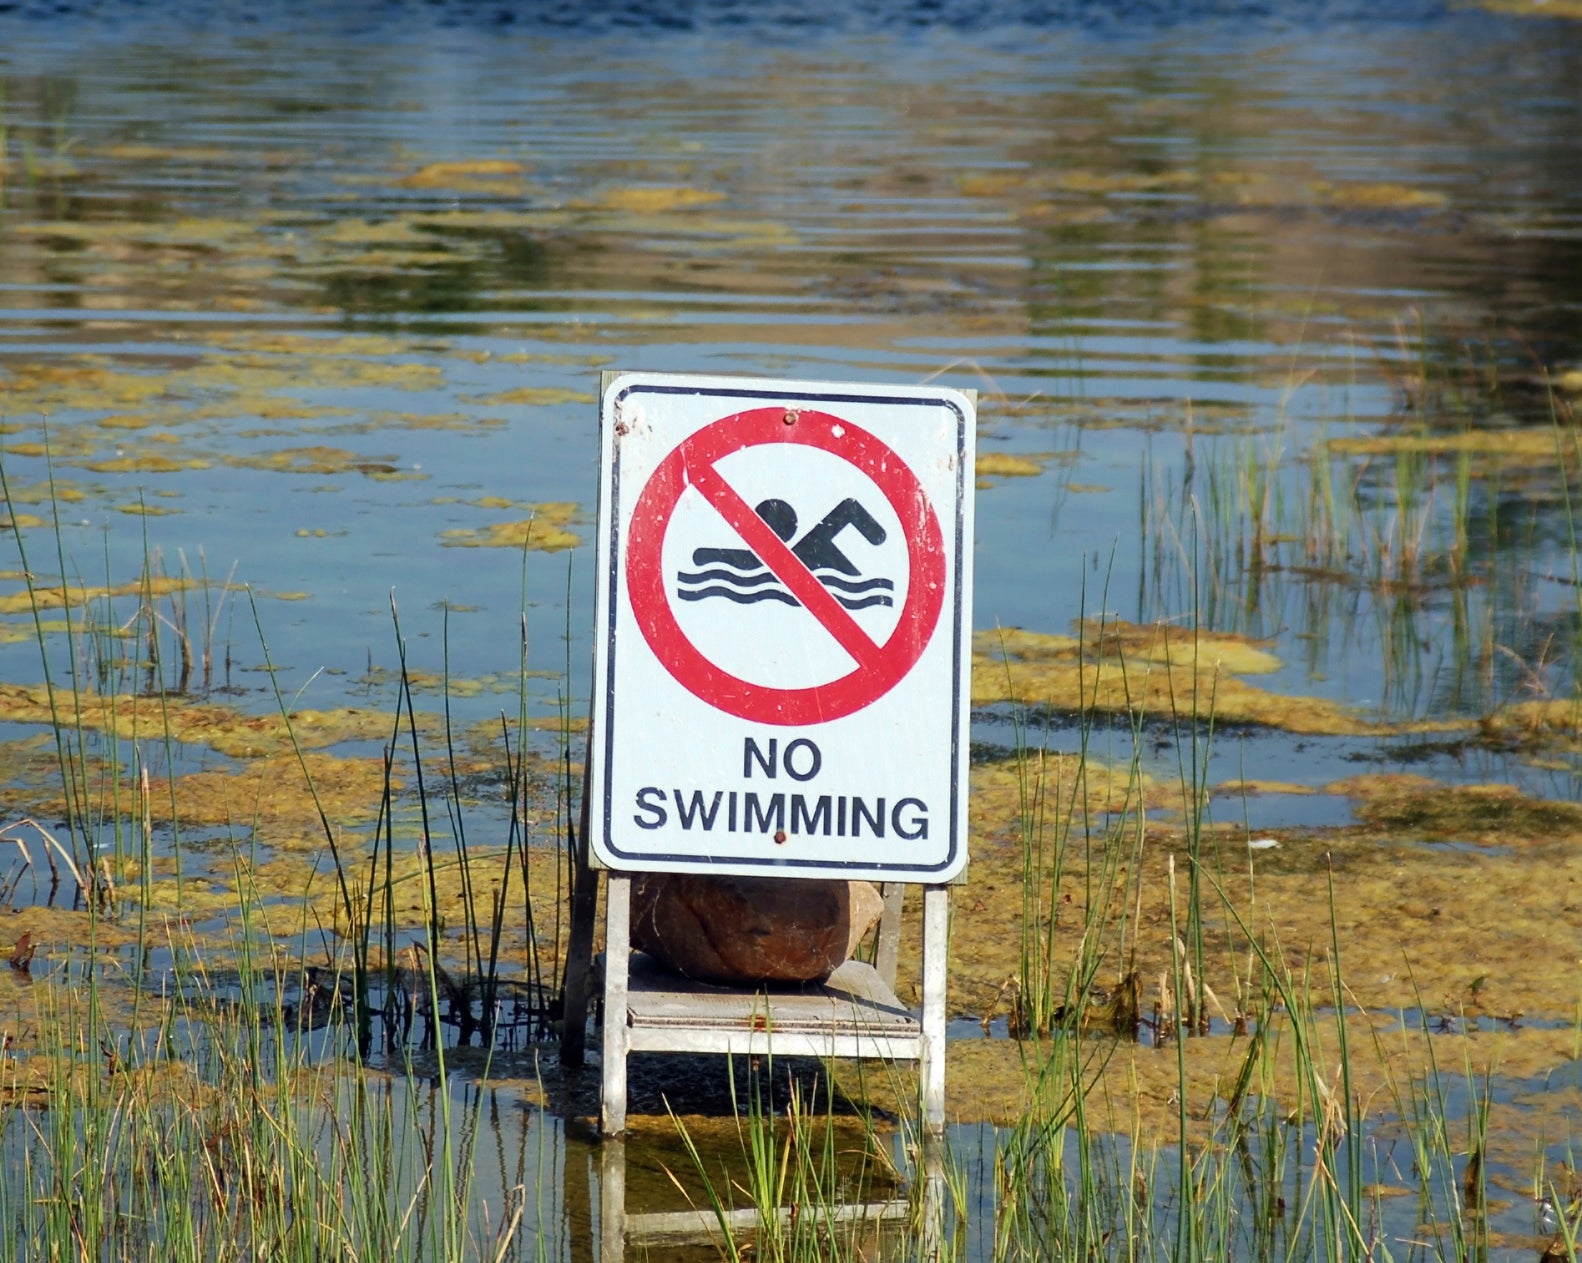 No swimming sign in a body of water